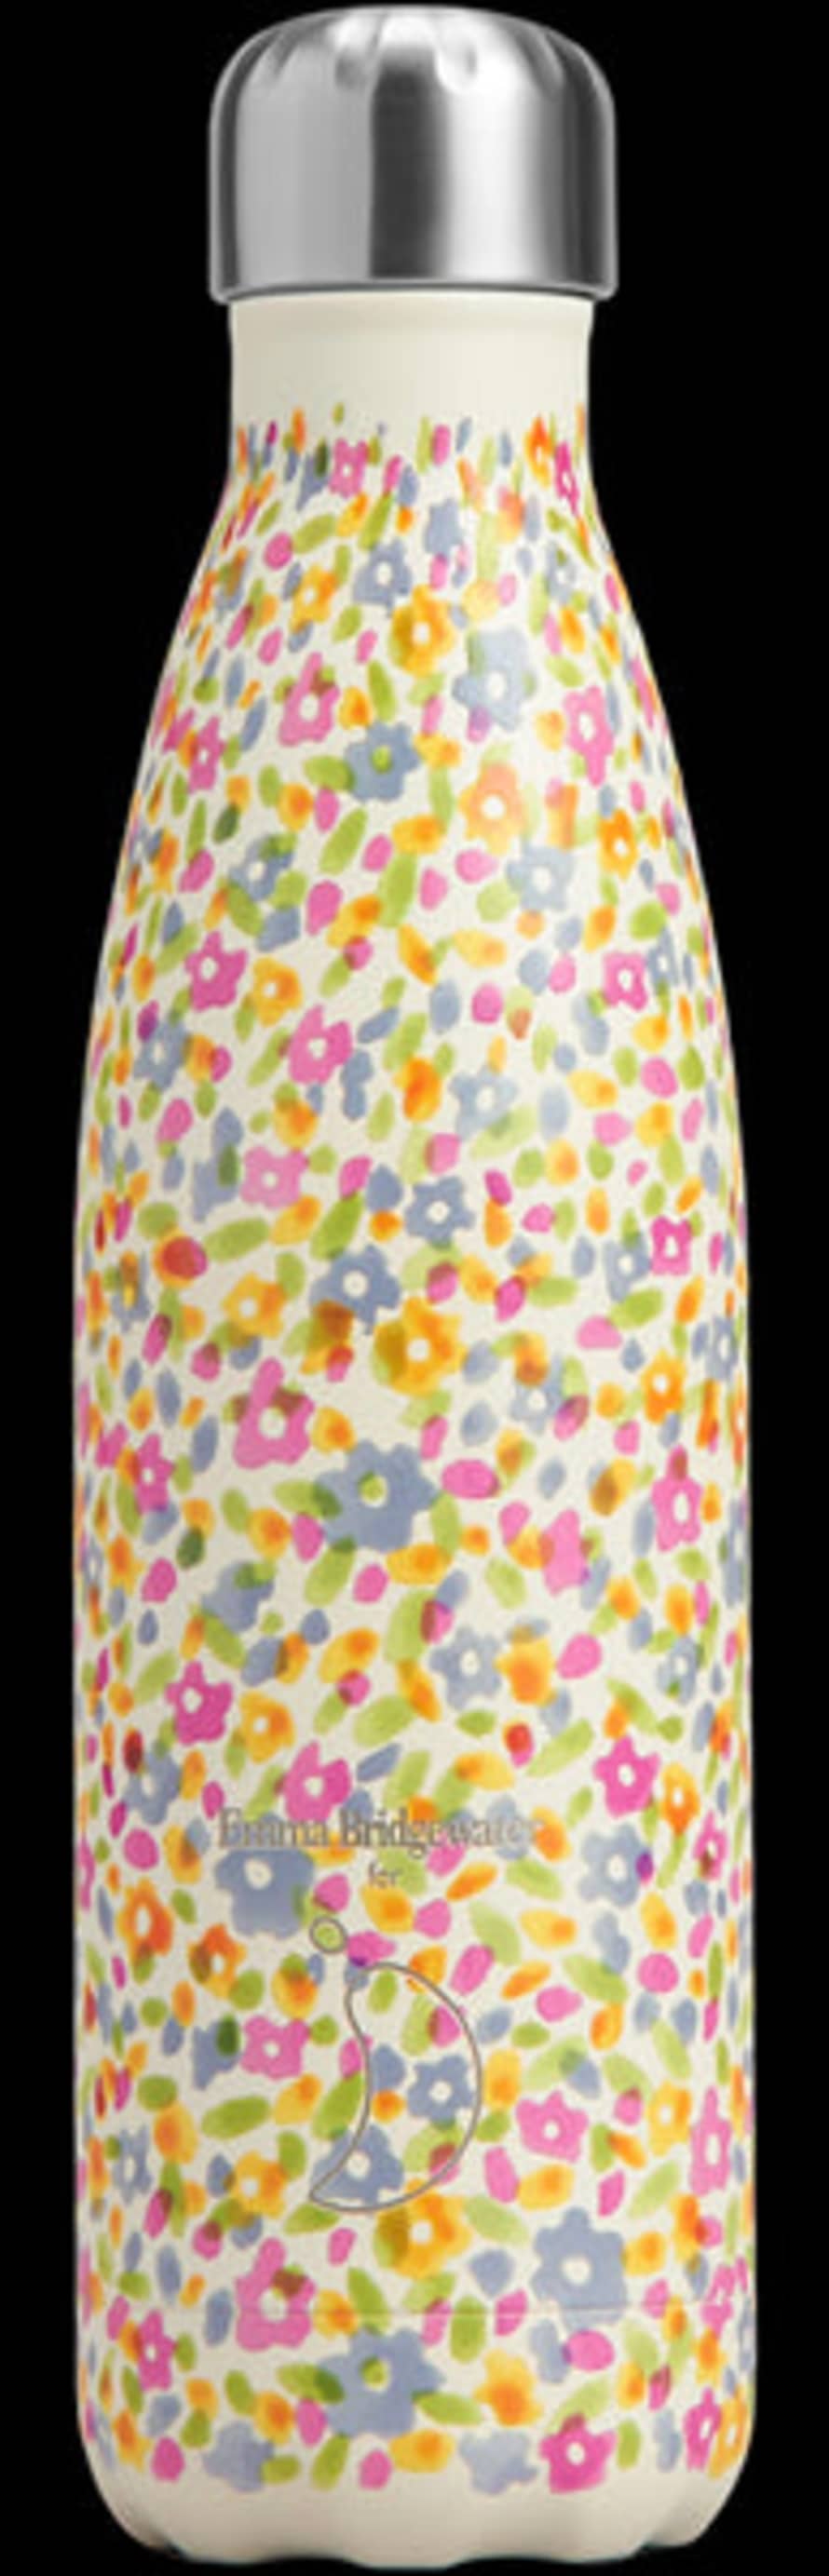 Chilly’s Bottles Chilly Bottle Emma Bridgewater Flowers Collection